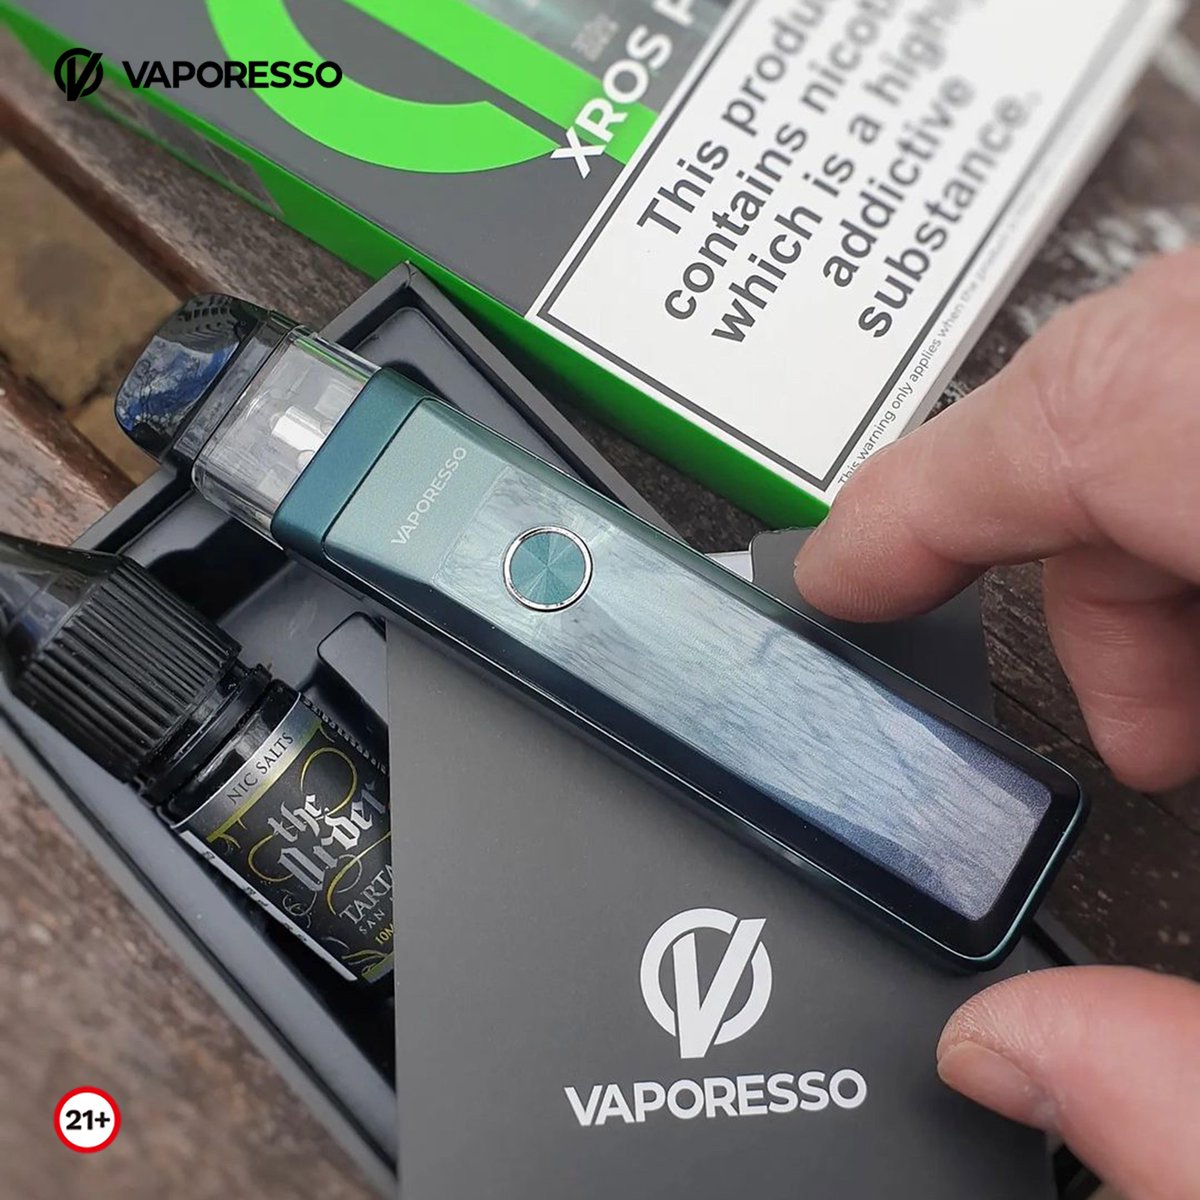 Vaporesso XROS Pro Kit Equipped with a 3ml capacity and 0.4ohm pod featuring top filling, convenience is at your fingertips.🙌🙌 📸 @cbvapor ⚠ Warning: The device is used with e-liquid which contains addictive chemical nicotine. For Adult use only.